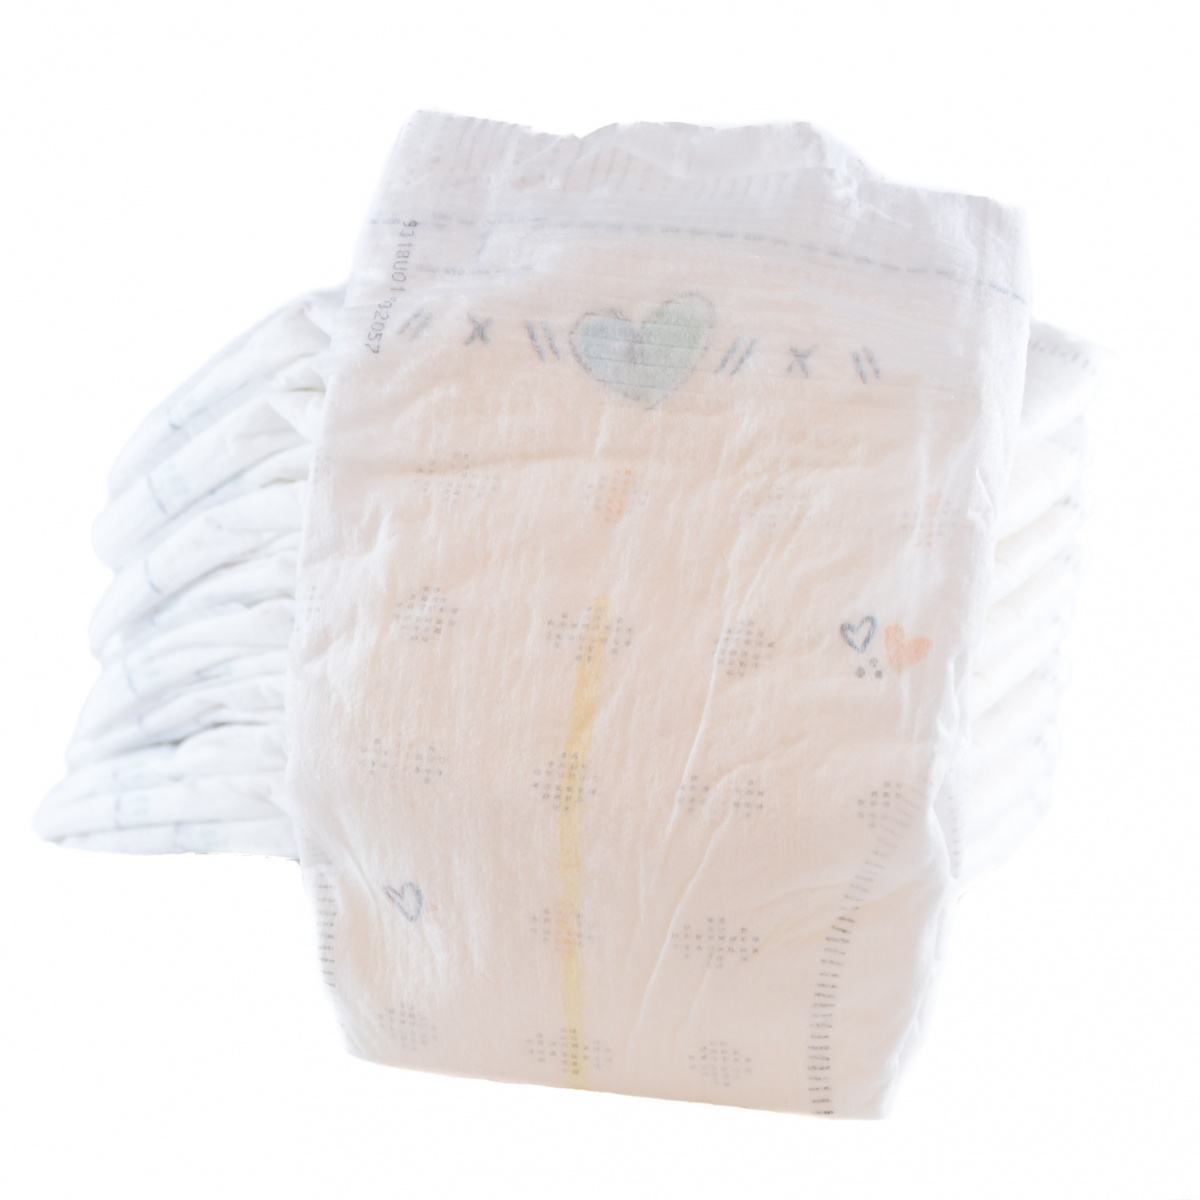 Pampers vs Mamia Nappies - Tried and Tested with Reviews